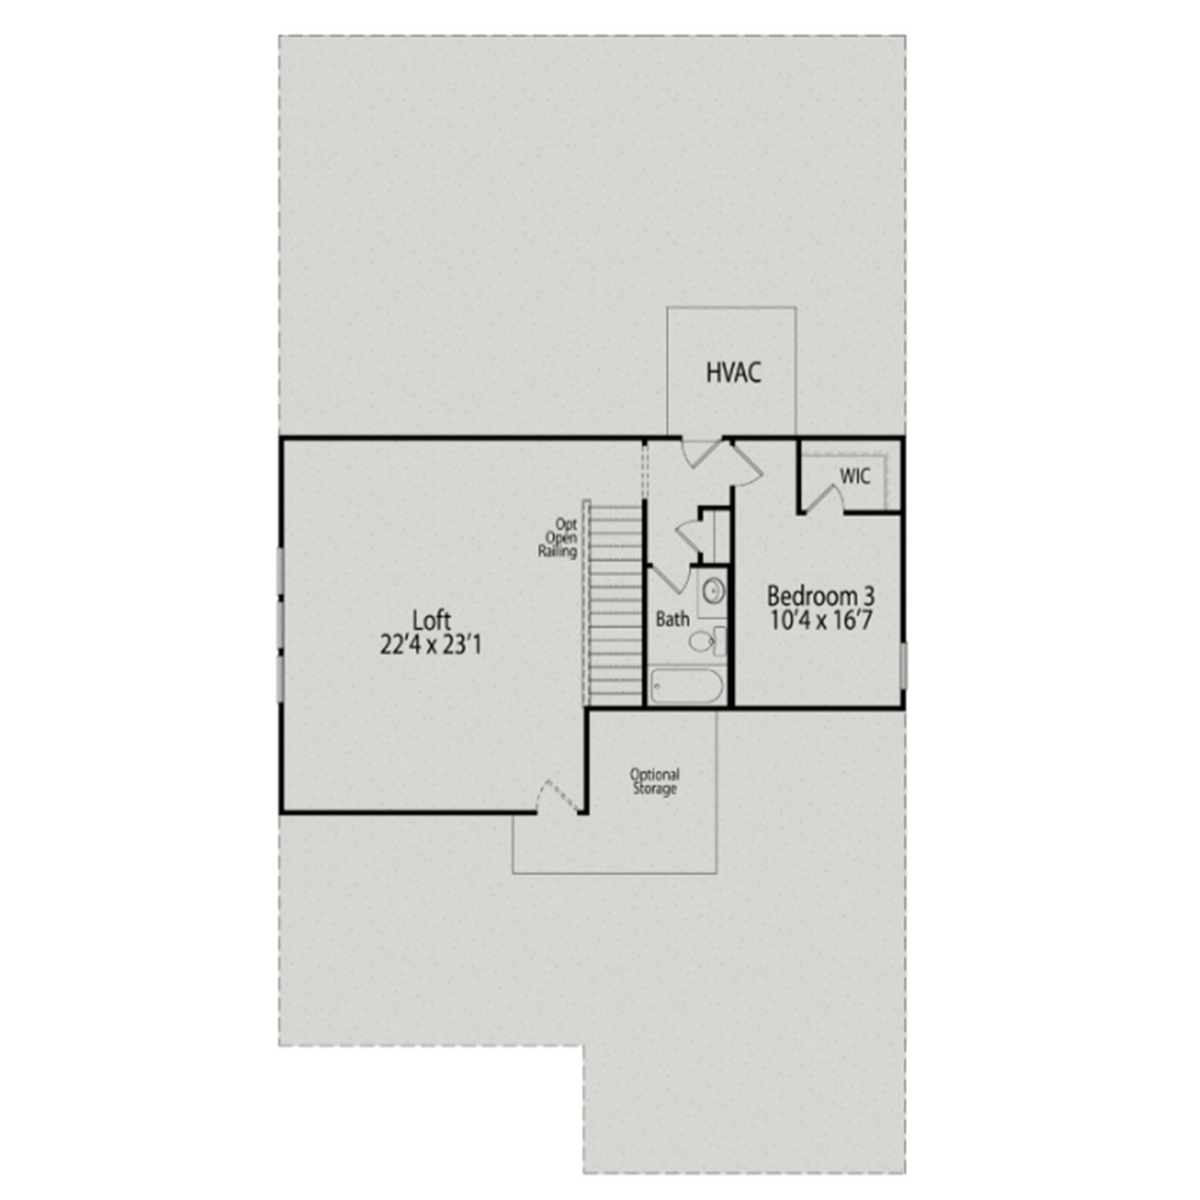 2 - Birch II A buildable floor plan layout in Davidson Homes' Tobacco Road community.